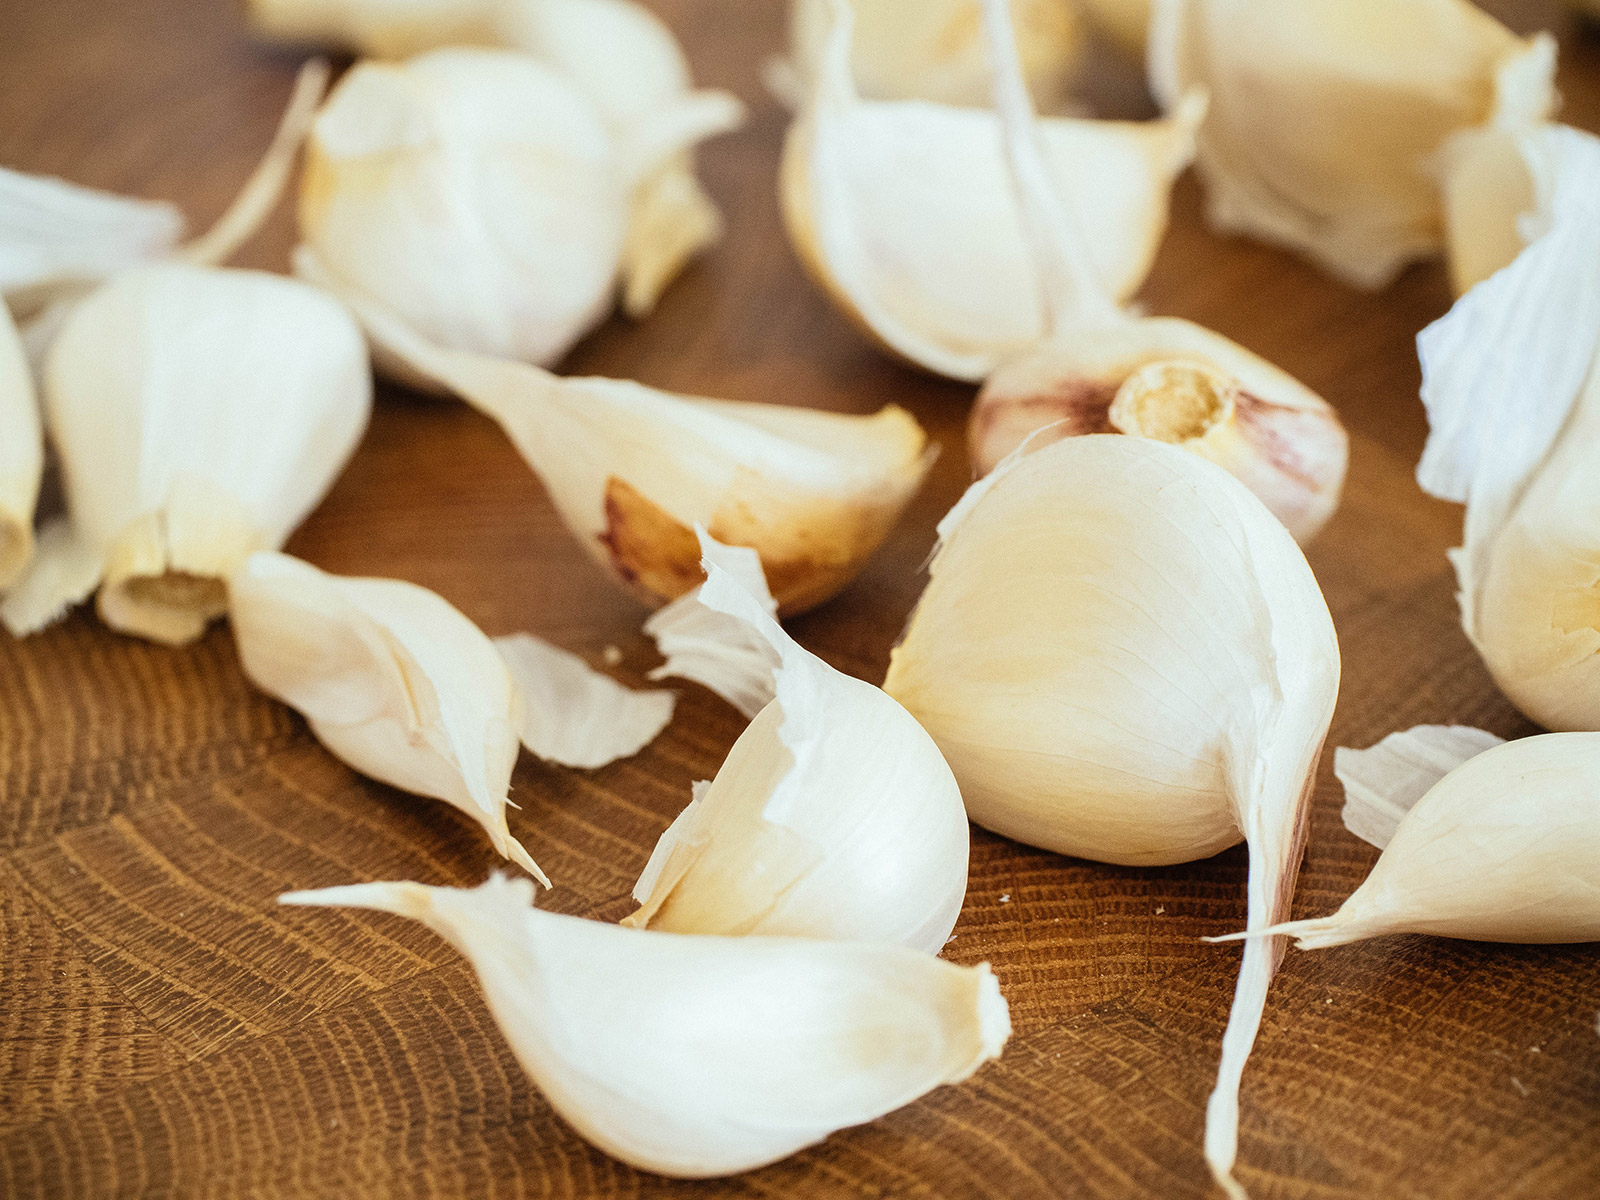 Garlic cloves separated from a bulb